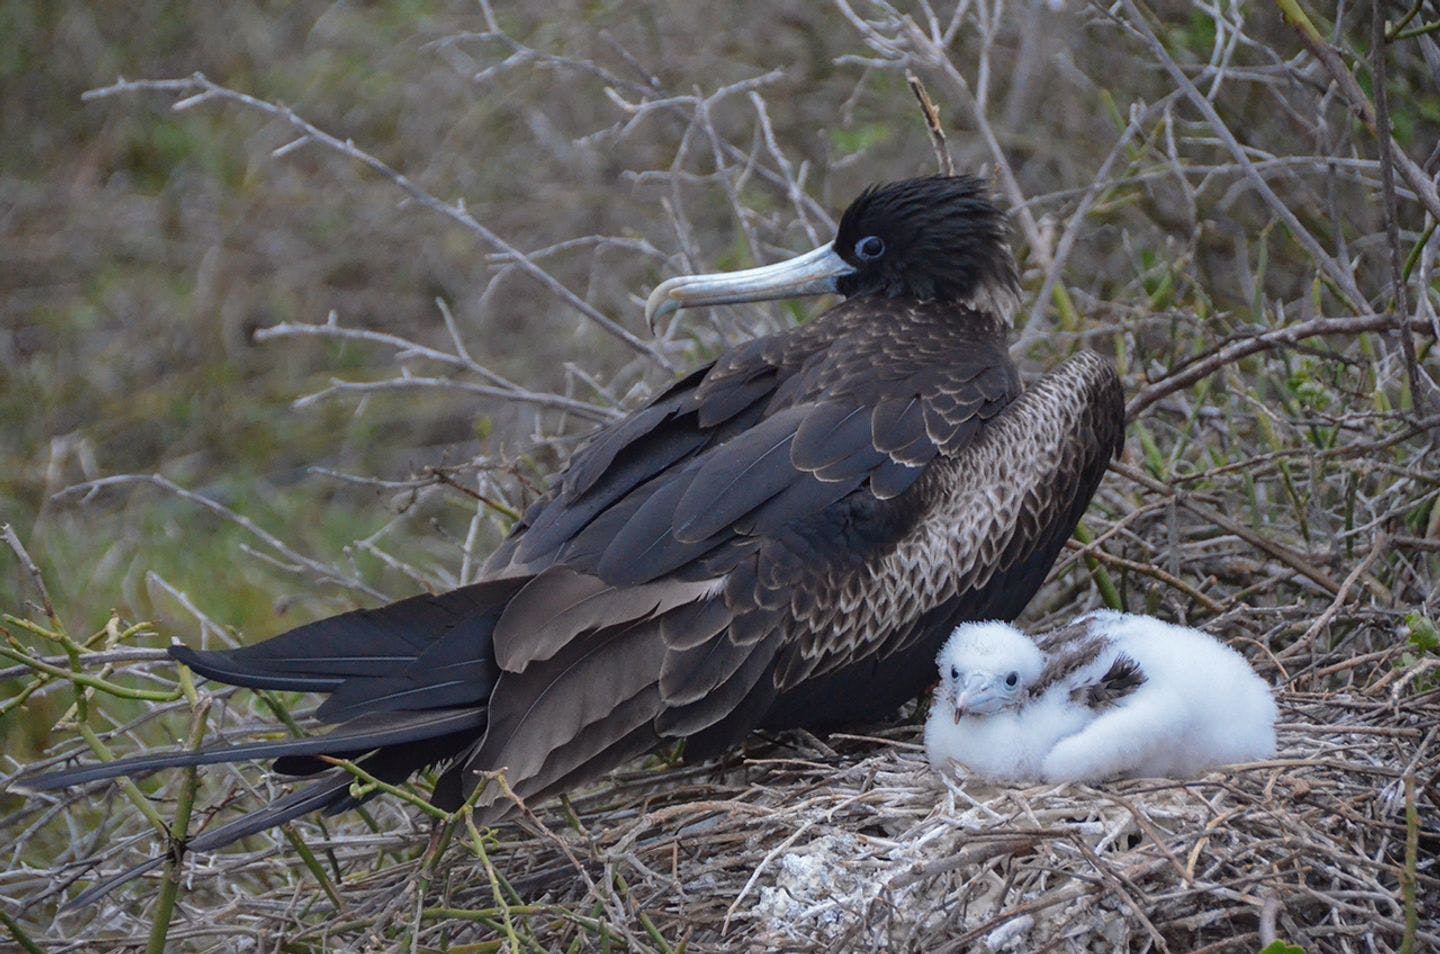 Female frigatebird with a chicken in her nest. Photo: Ronald Toppe